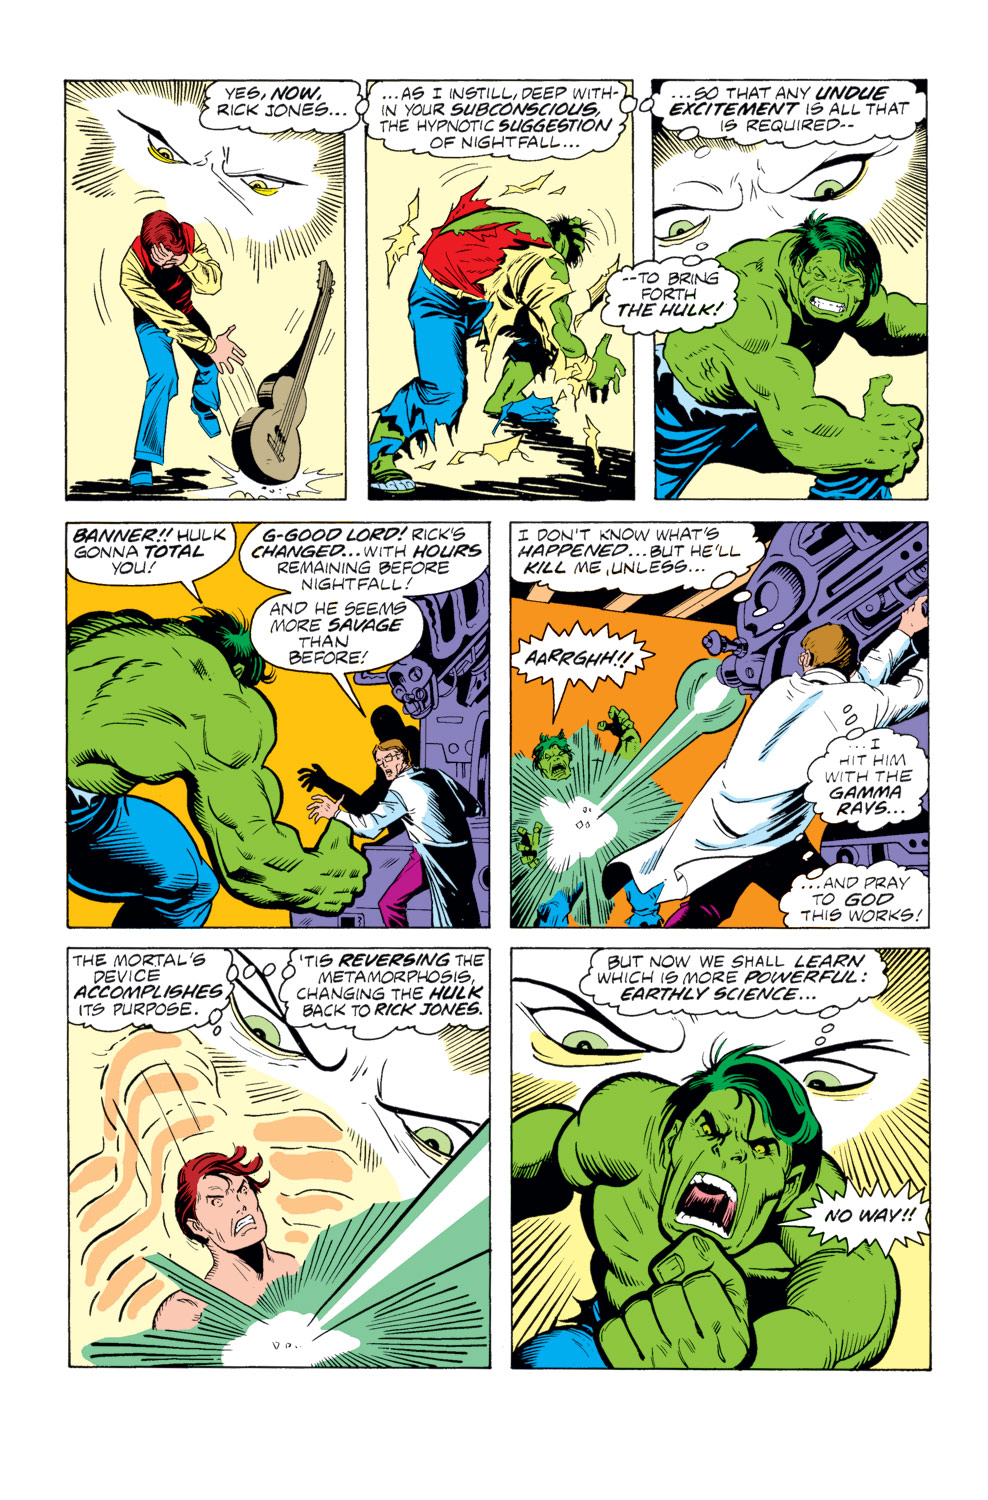 What If? (1977) issue 12 - Rick Jones had become the Hulk - Page 9